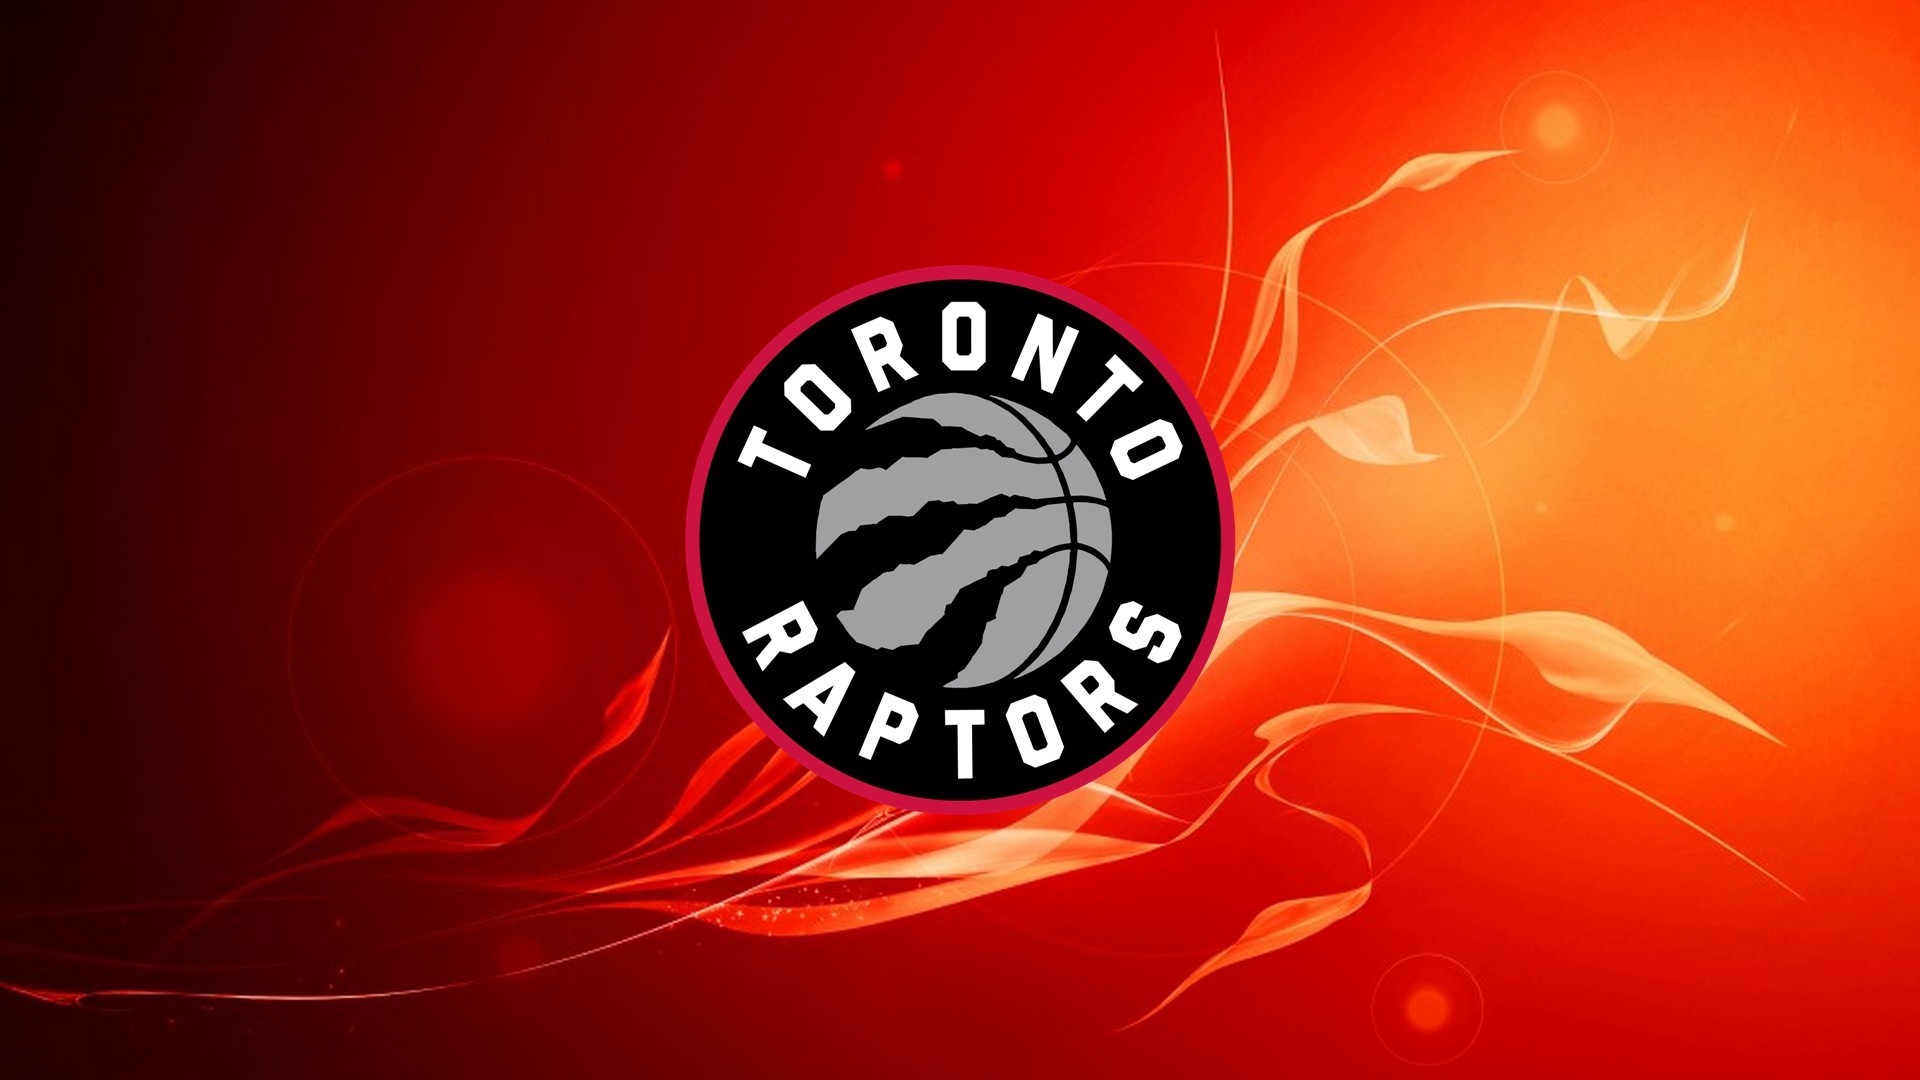 1920x1080 Wallpapers HD Toronto Raptors with image dimensions  pixel. You  can make this wallpaper for